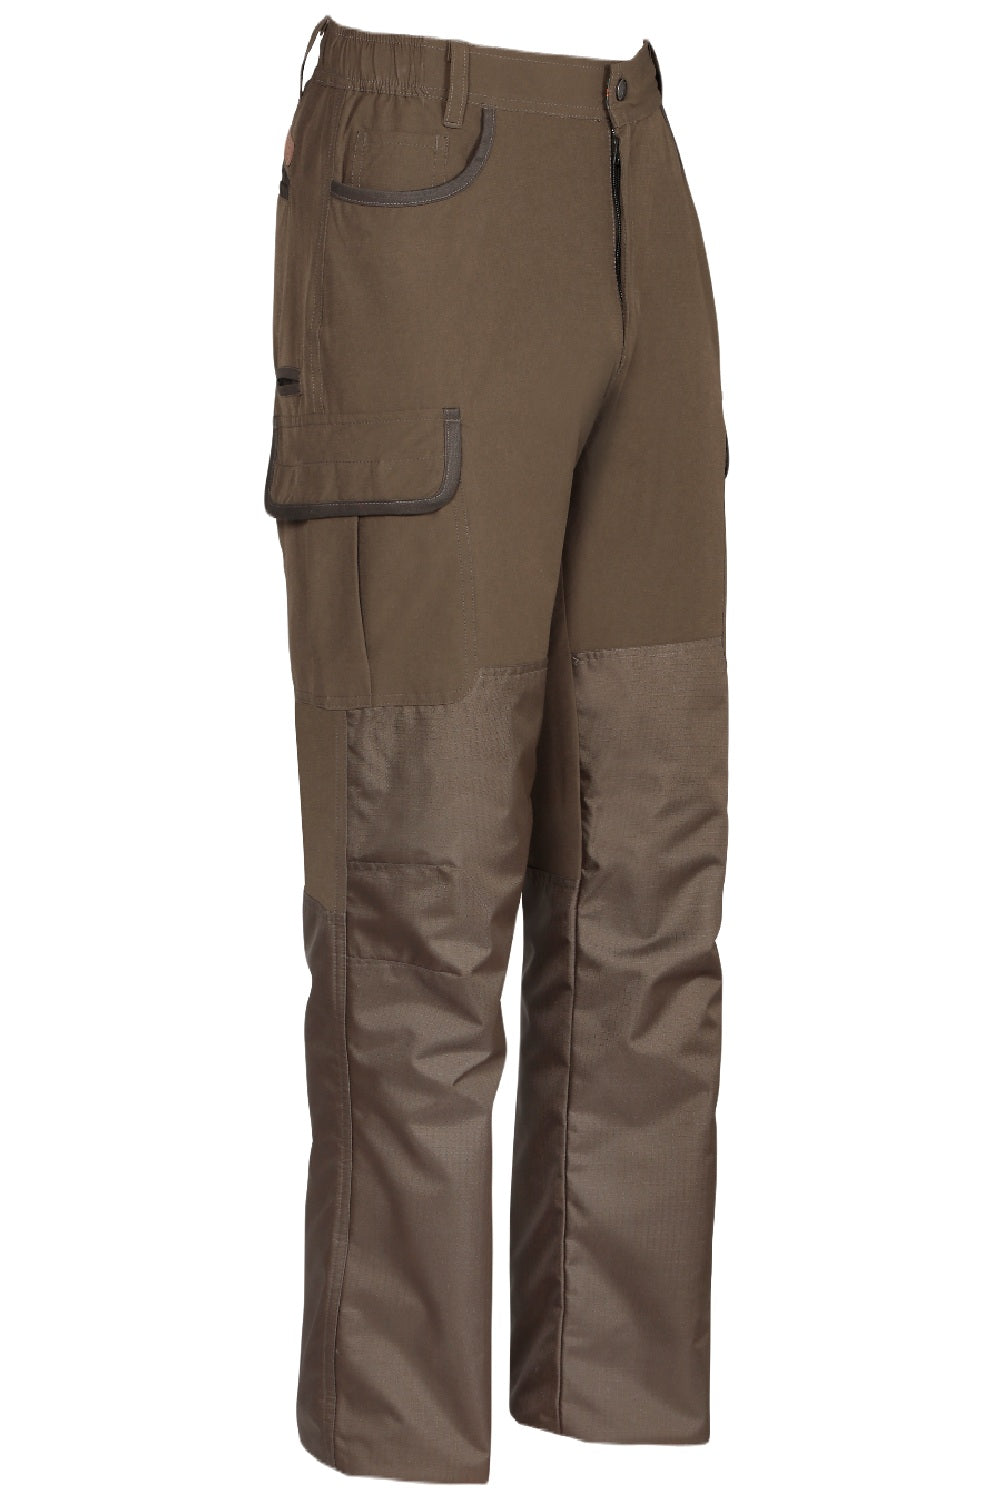 Percussion Savane Reinforced Hyperstretch Trousers in Khaki